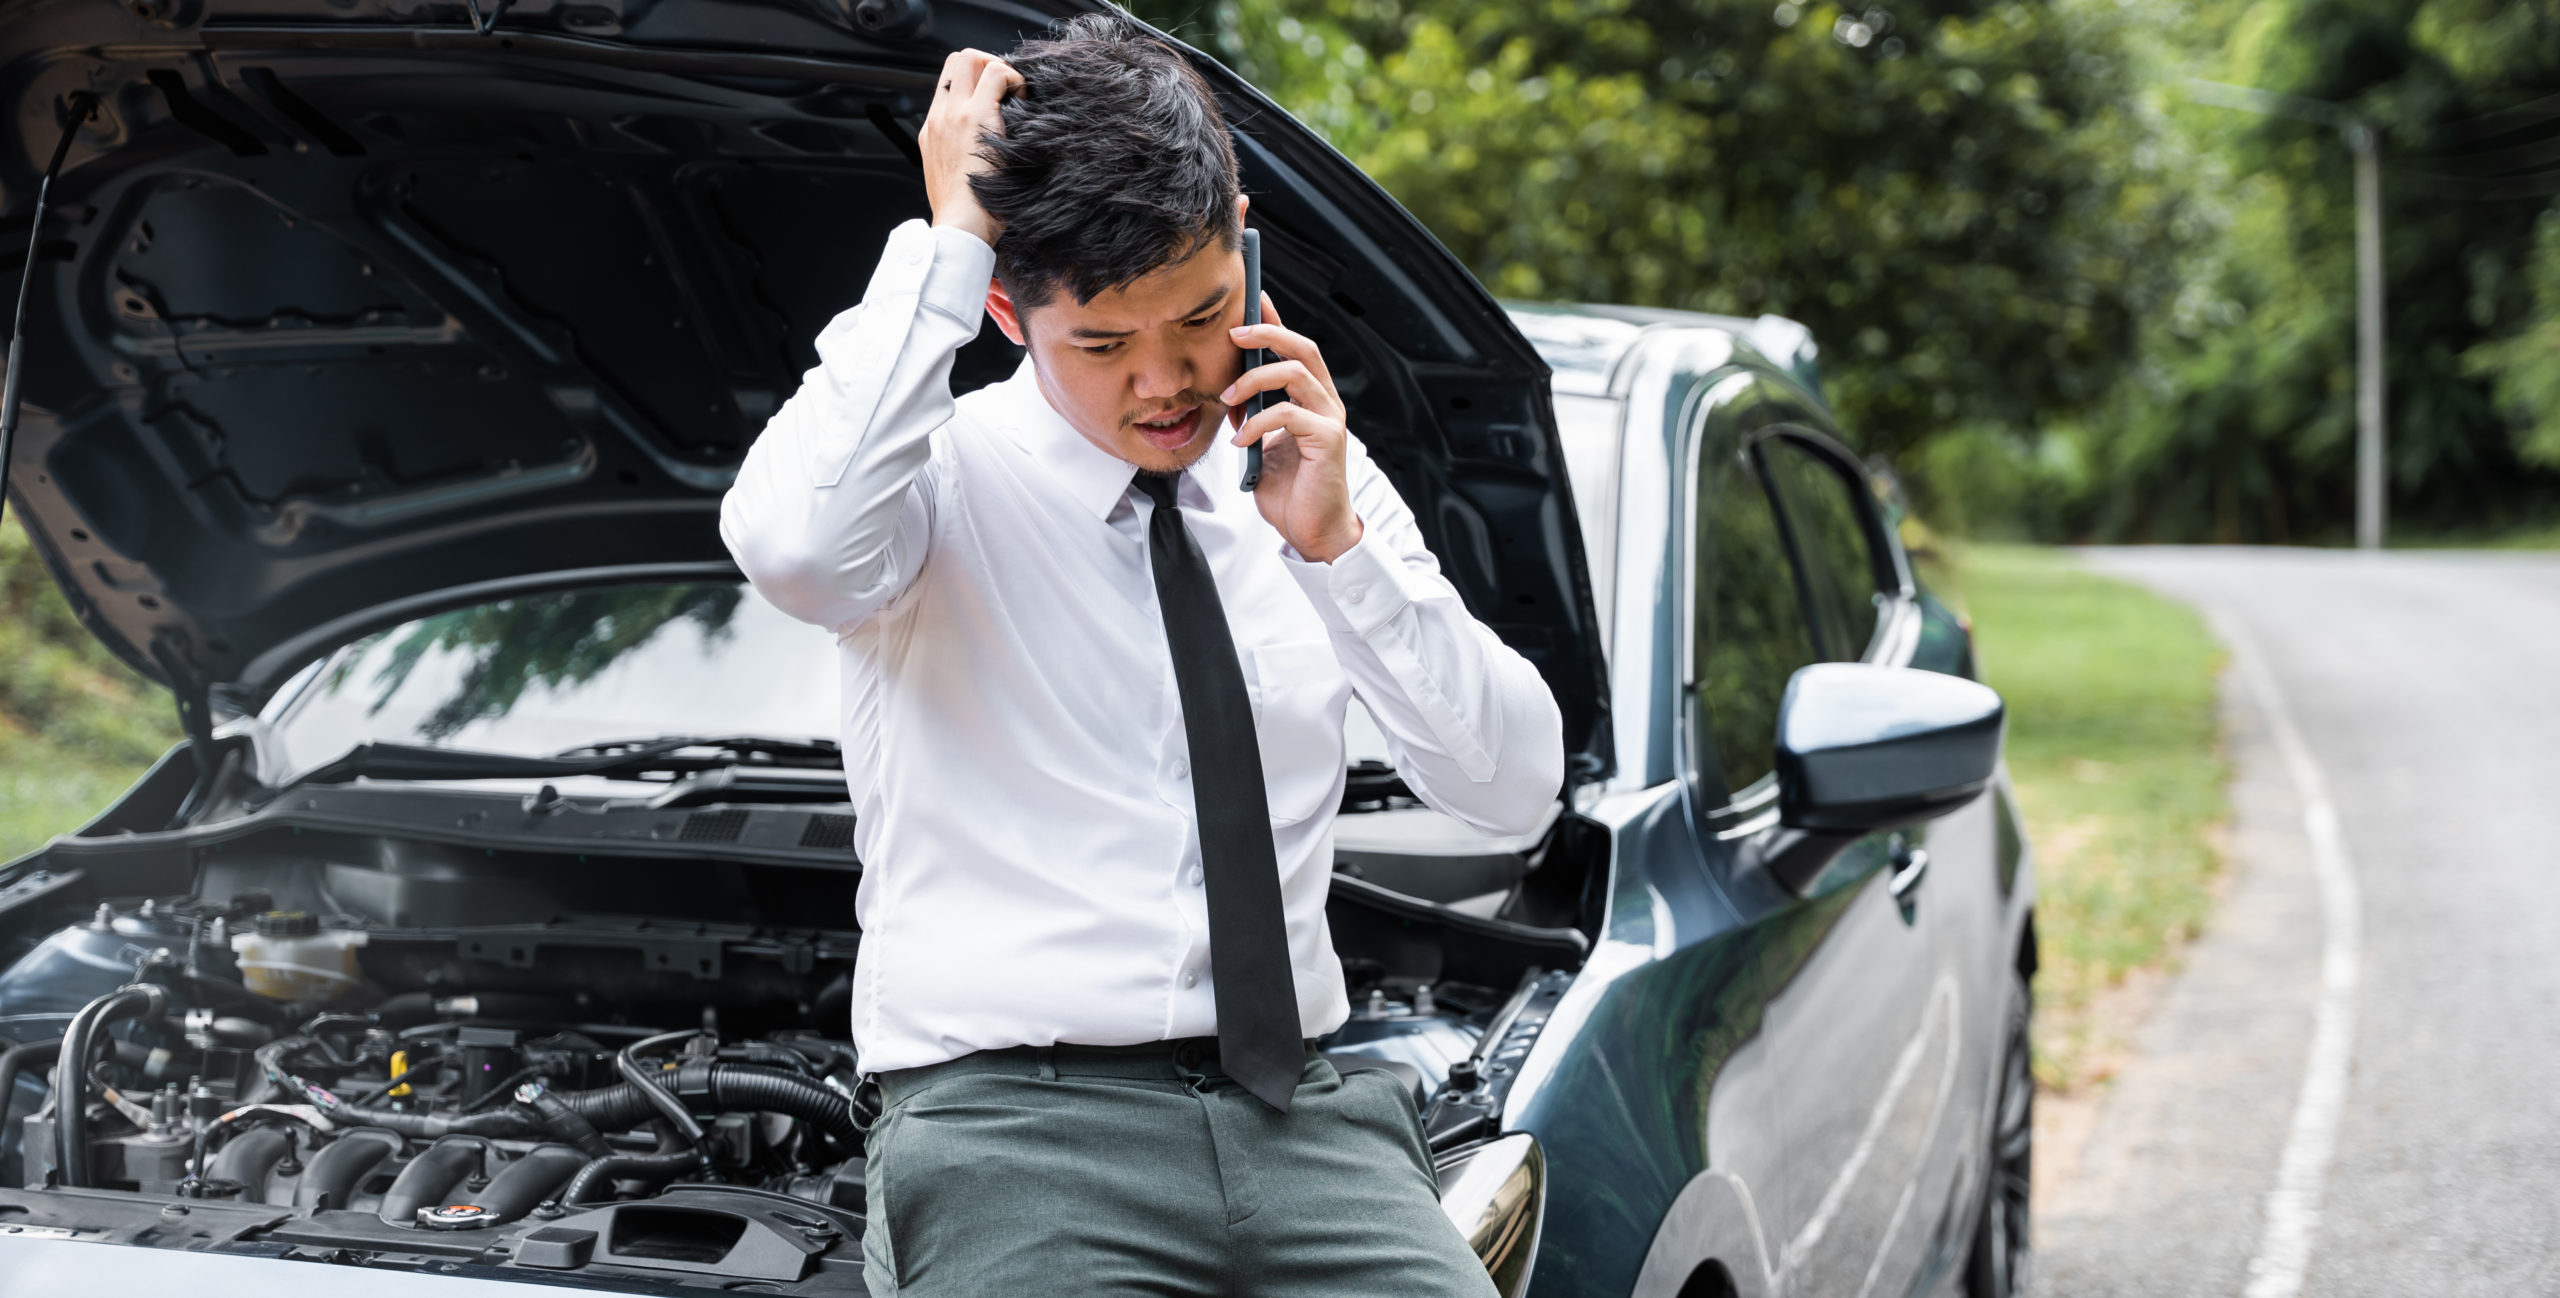 https://autolab.com.co/wp-content/uploads/asian-businessman-stranded-on-the-road-after-car-b-2023-11-27-04-55-47-utc-scaled.jpg